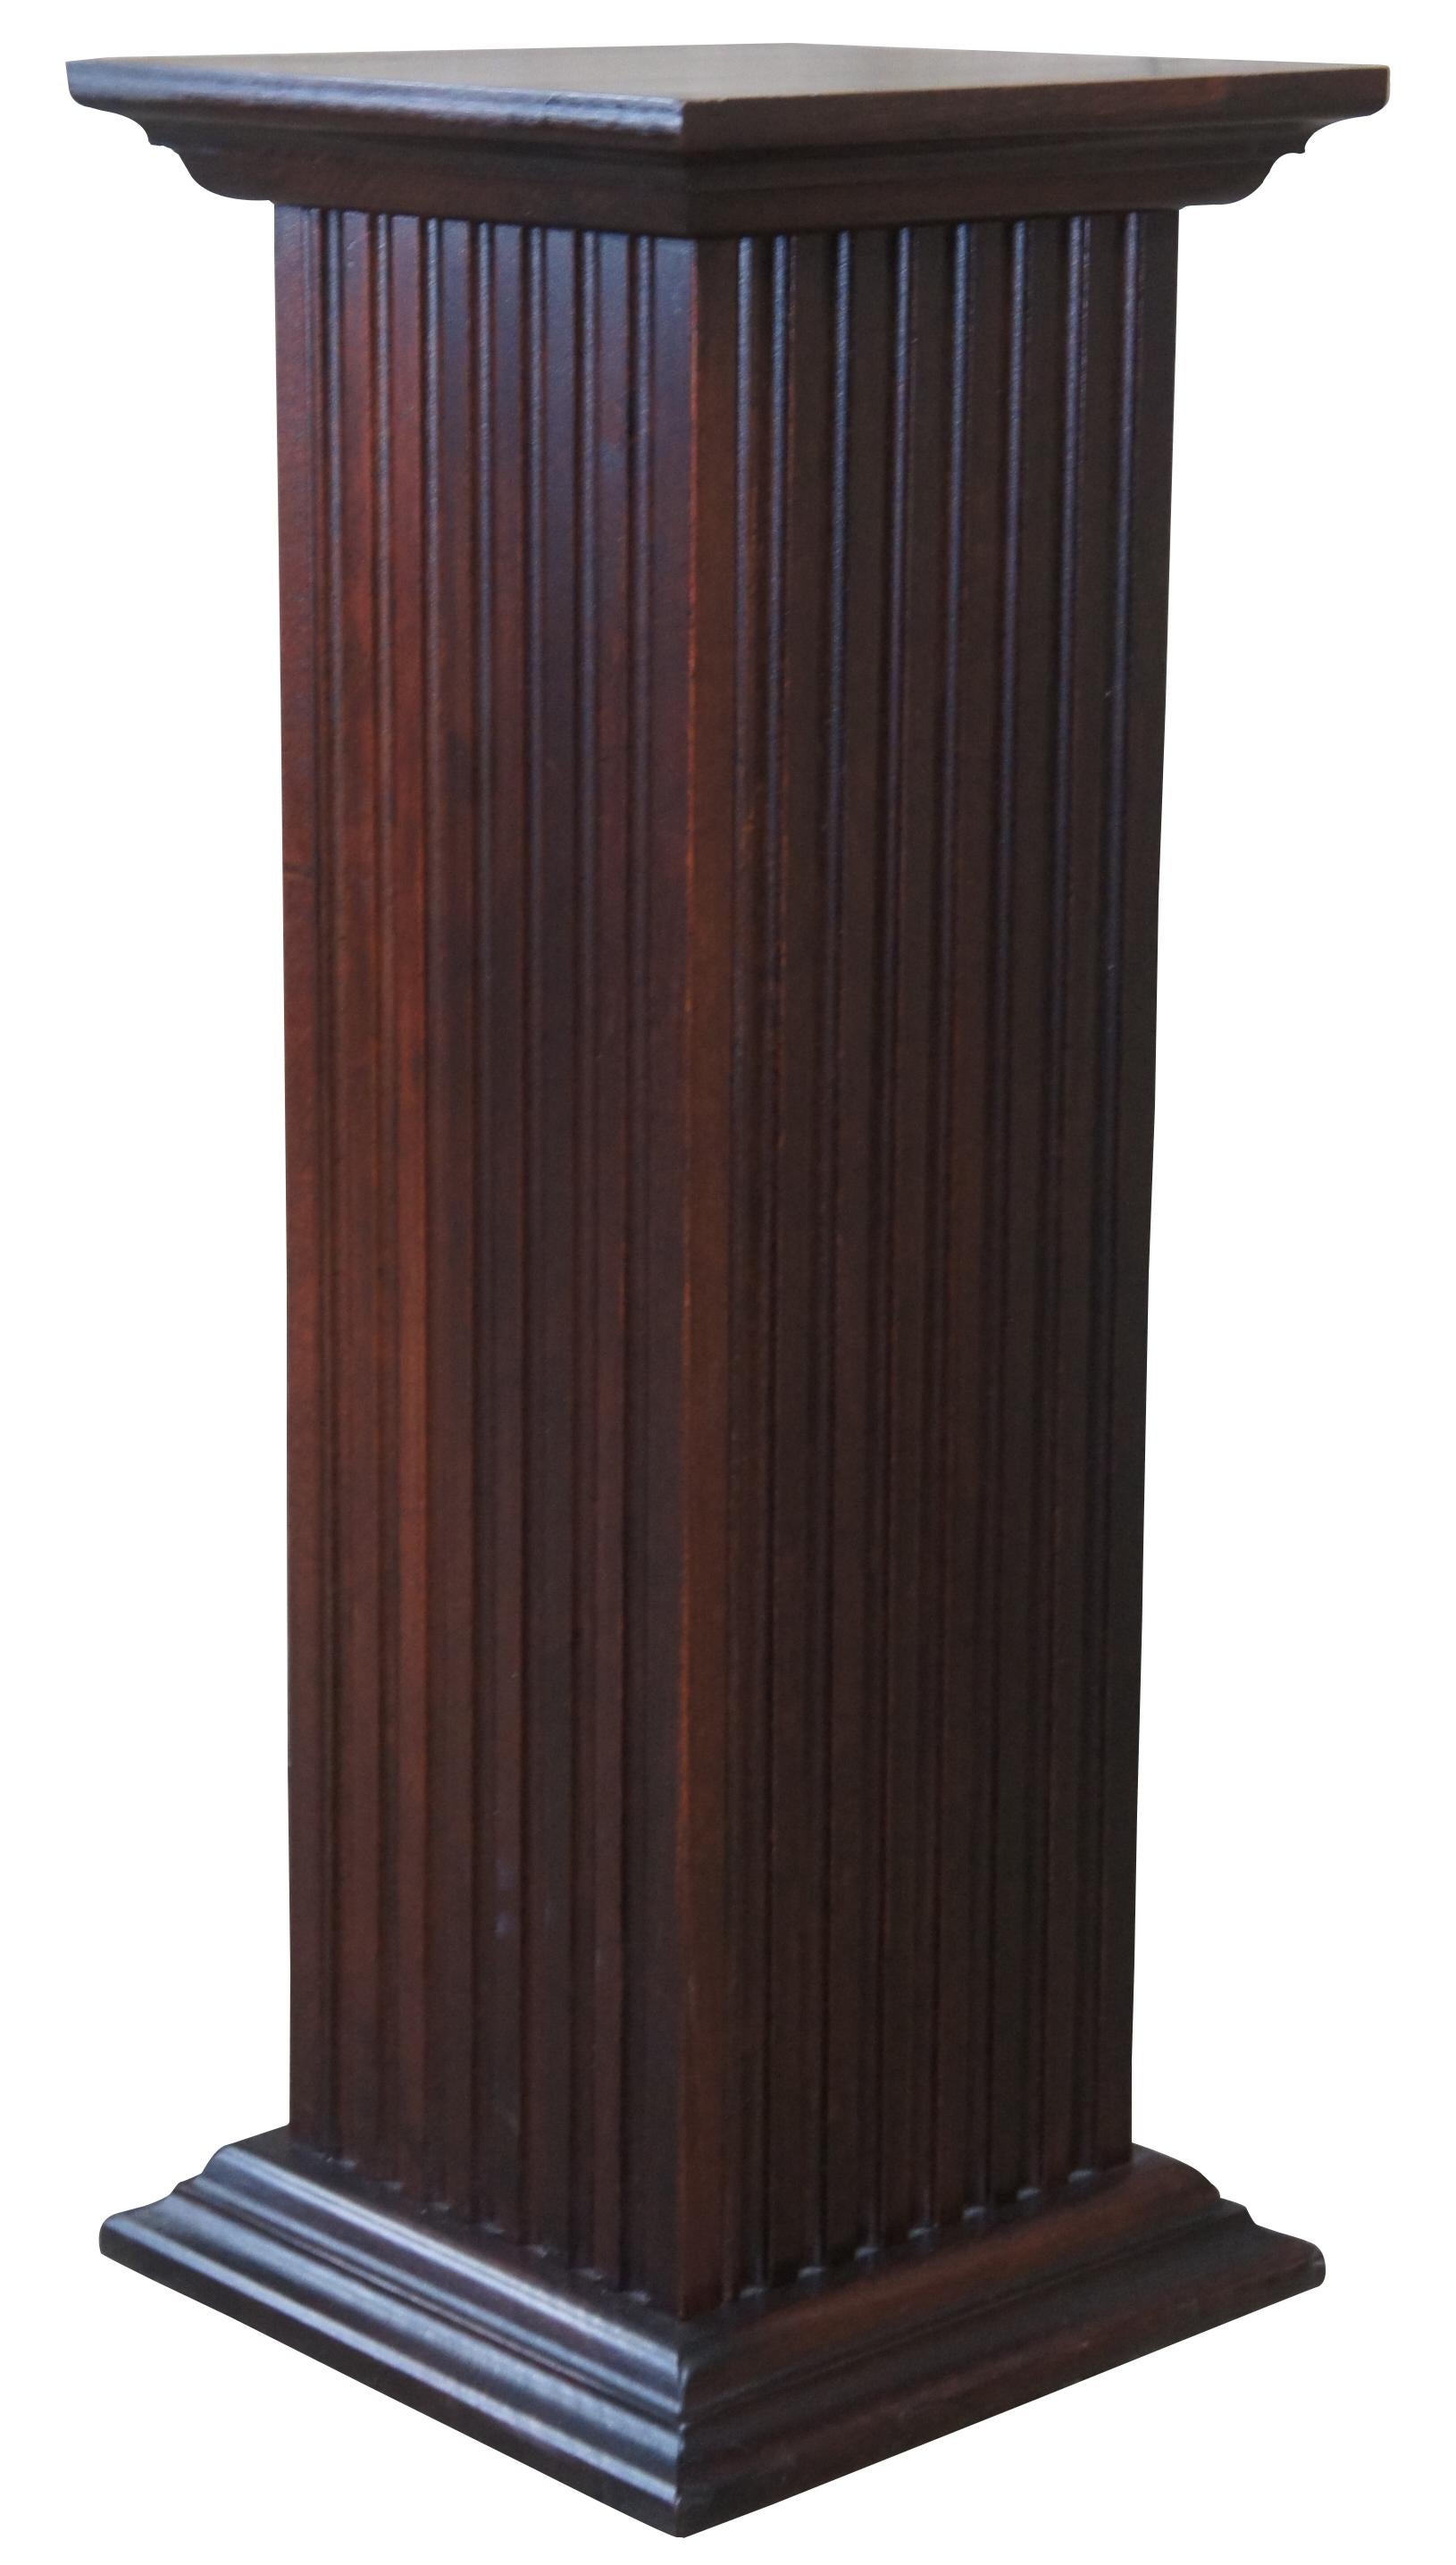 Vintage square pedestal or stand. Made of pine with a mahogany finish and fluted columns. Measure: 30